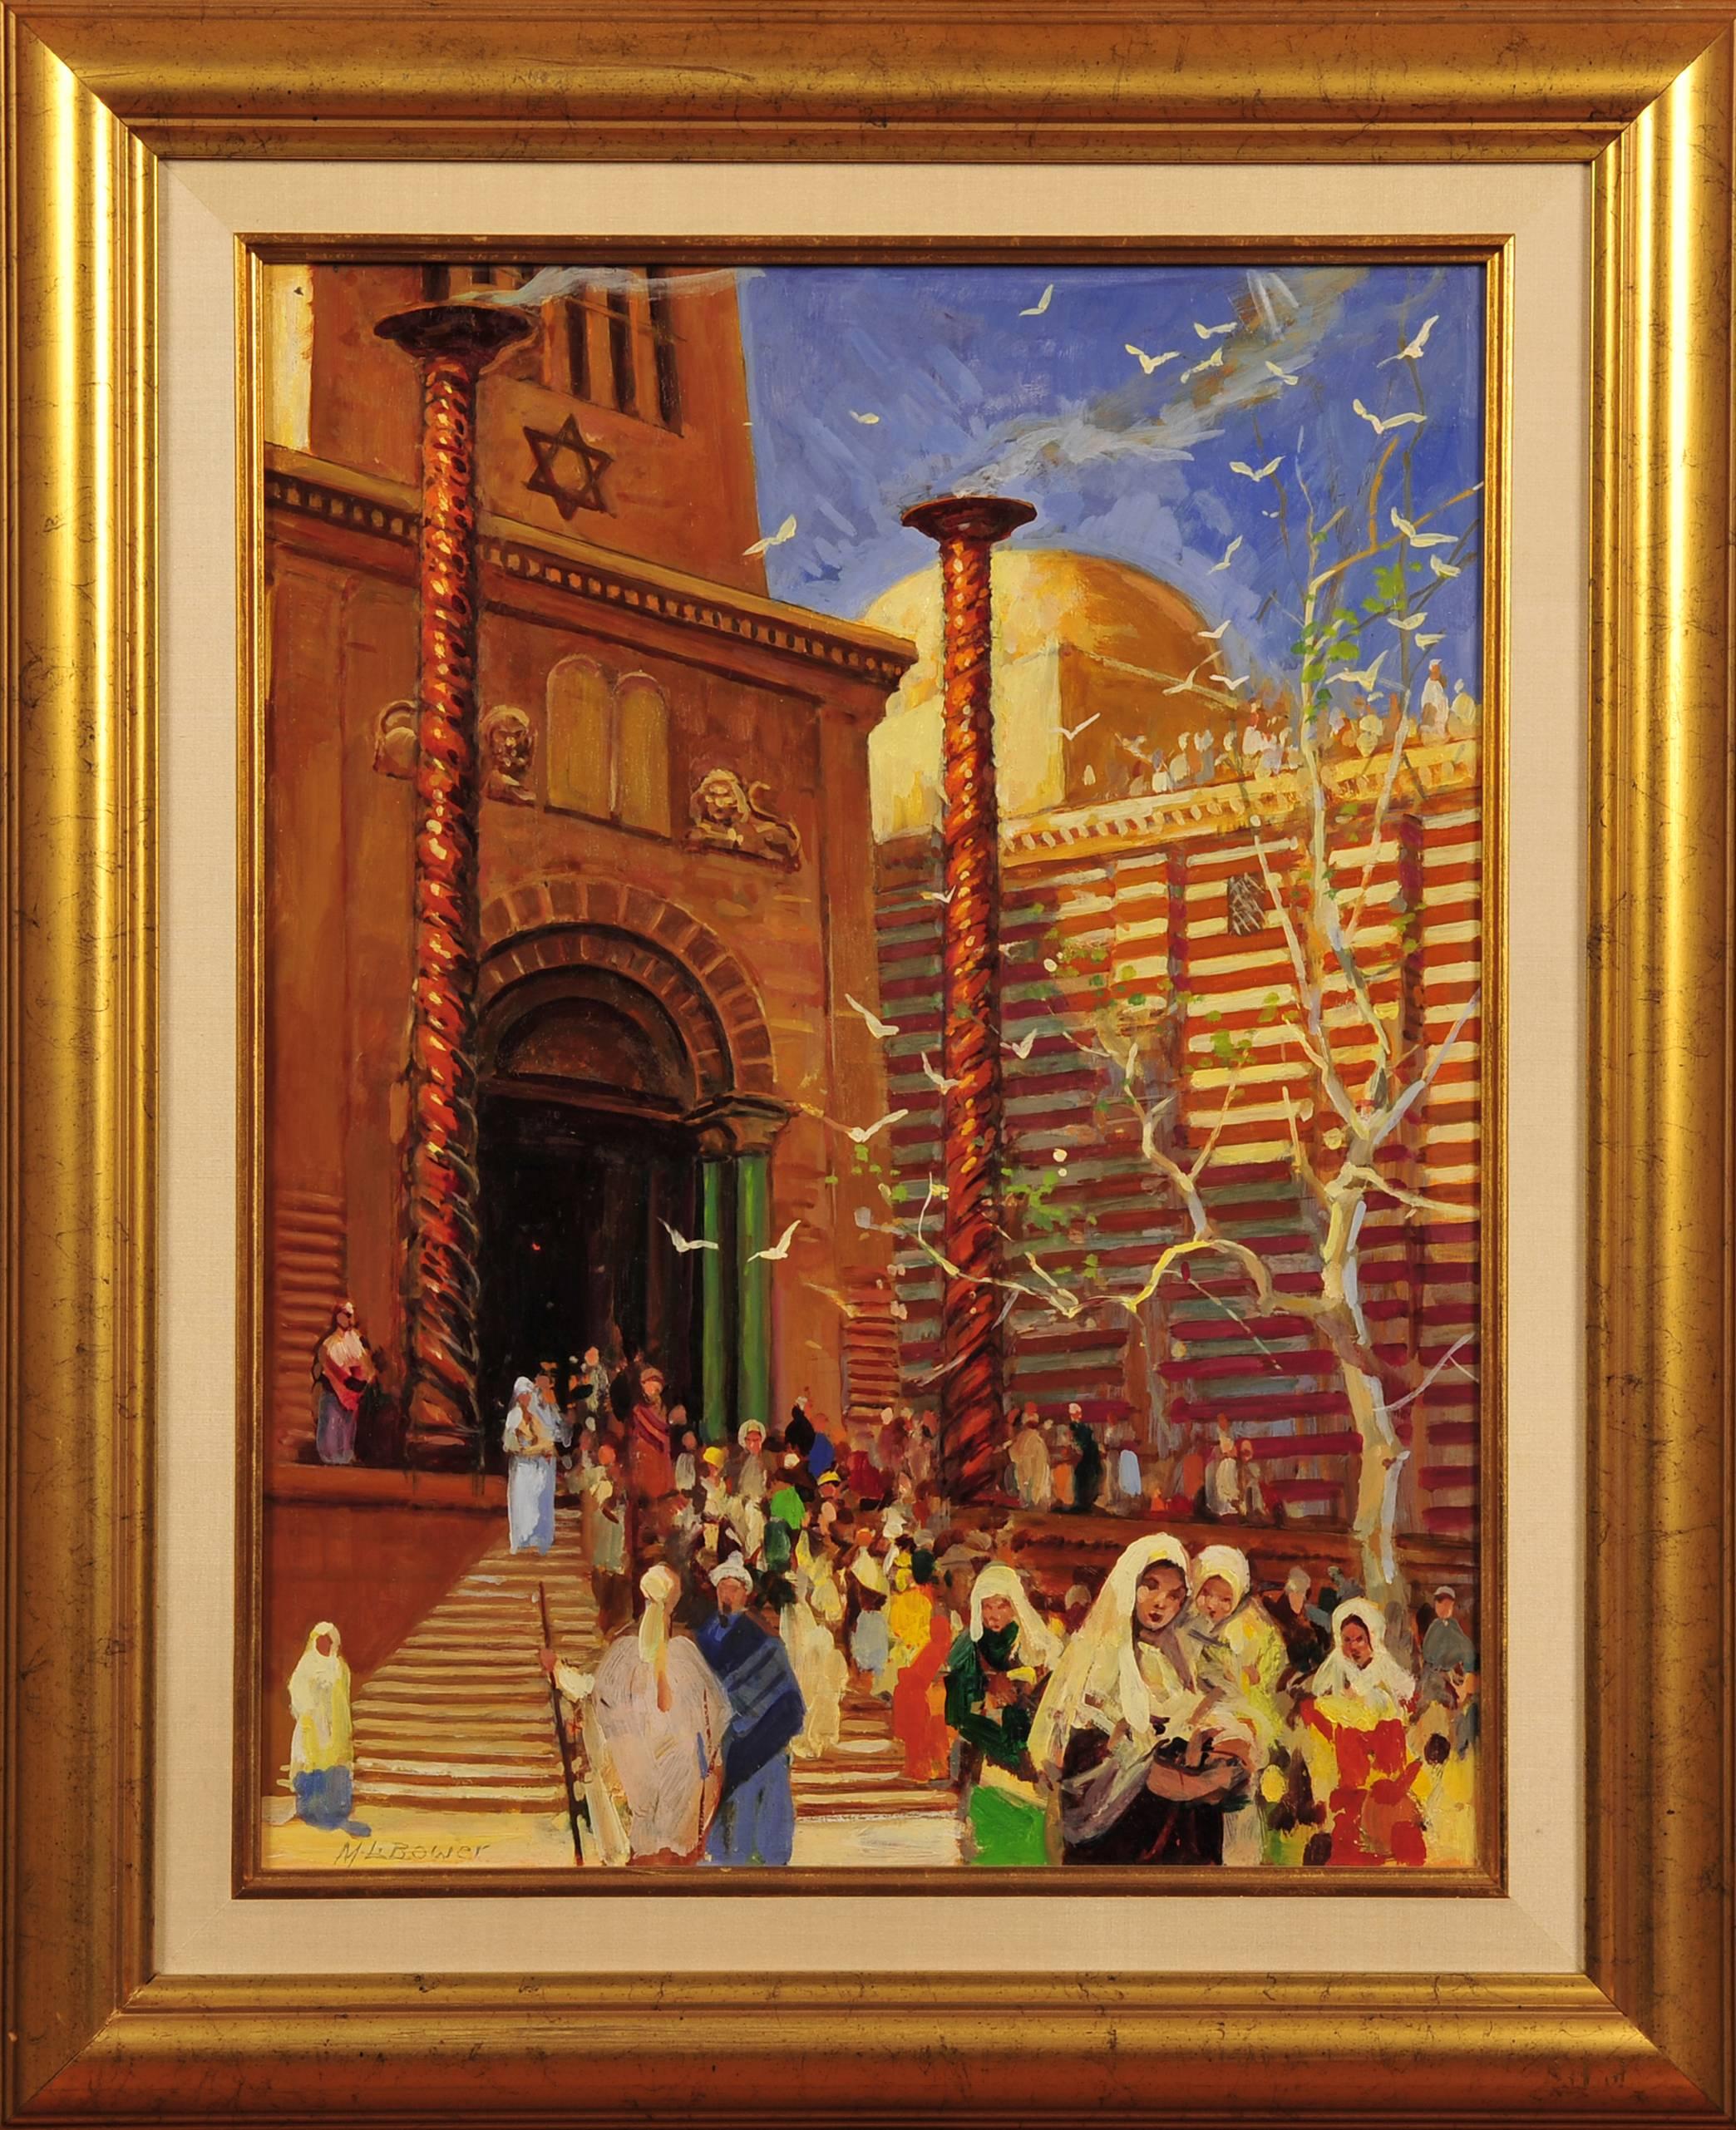 The Holy Temple, Biblical Illustration - Painting by Maurice L. Bower